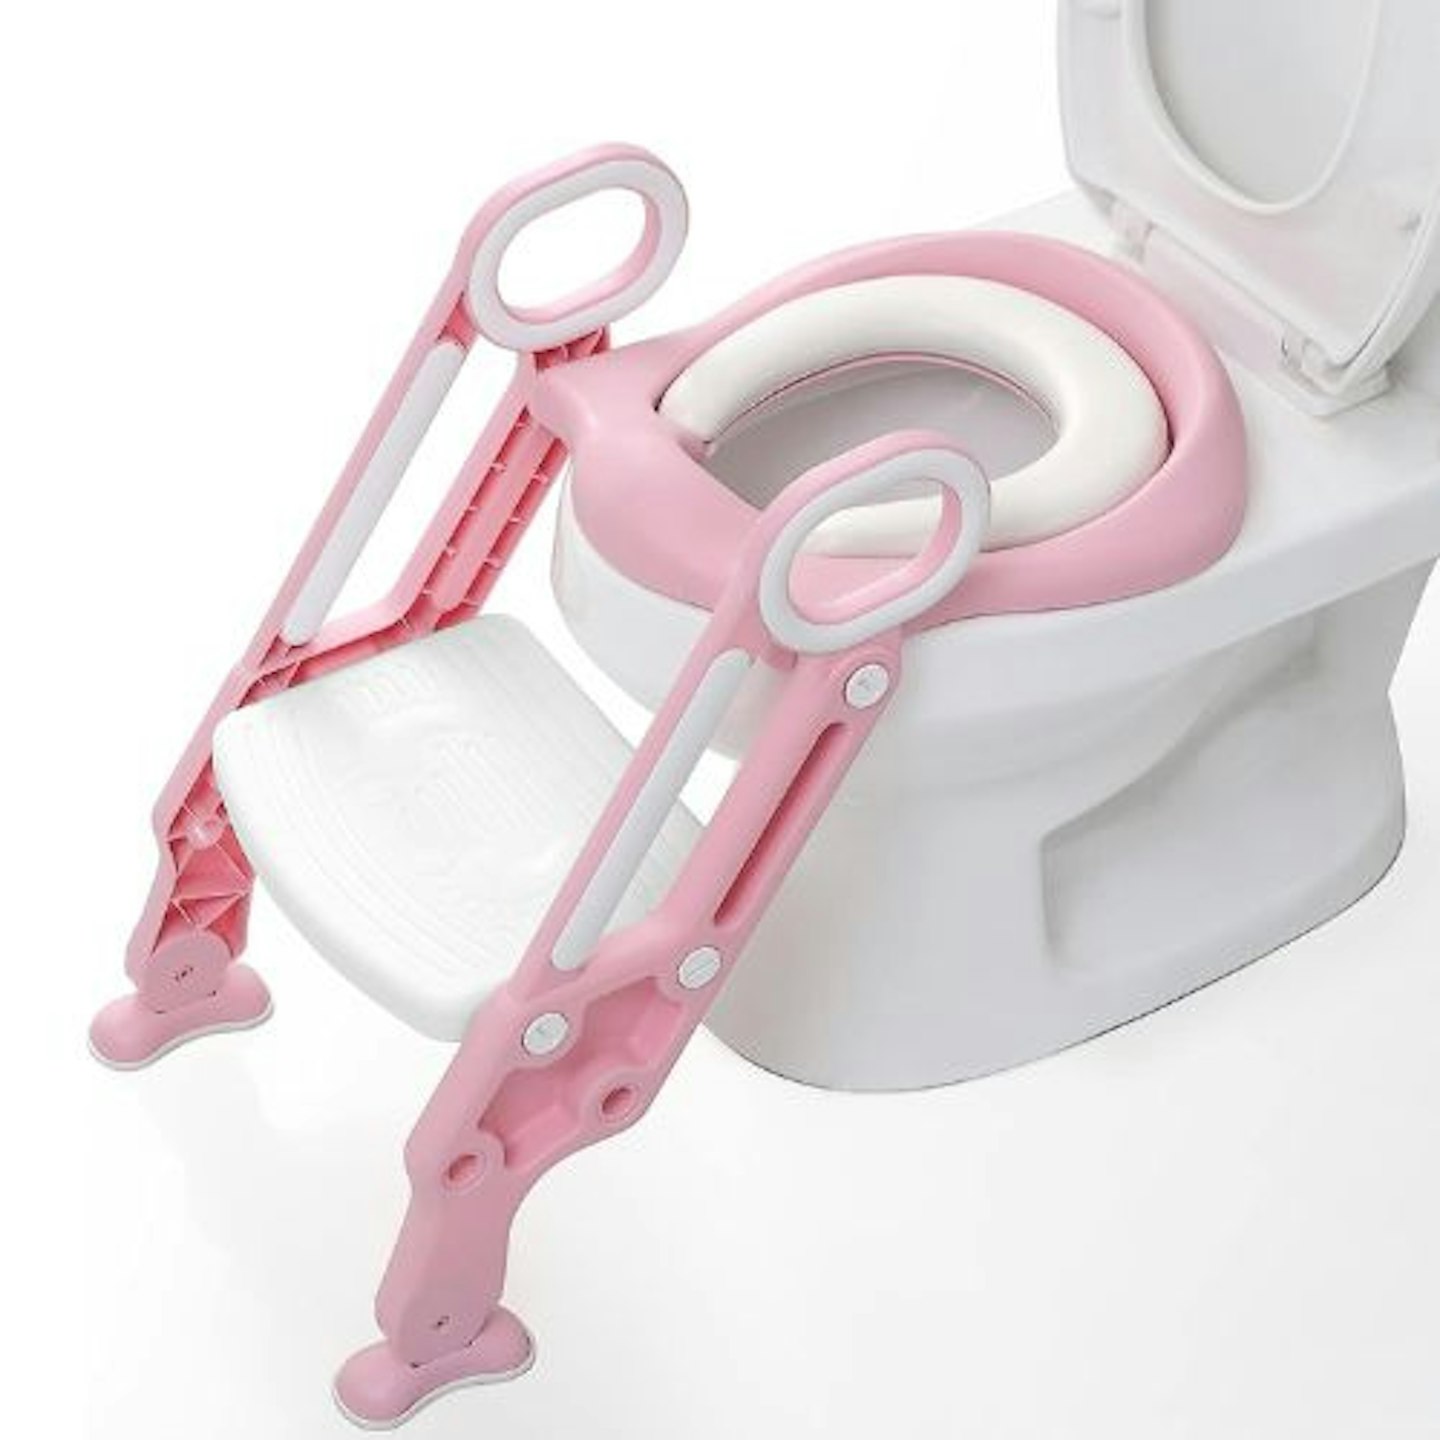 9 Best Toilet Training Accessories For Toddlers